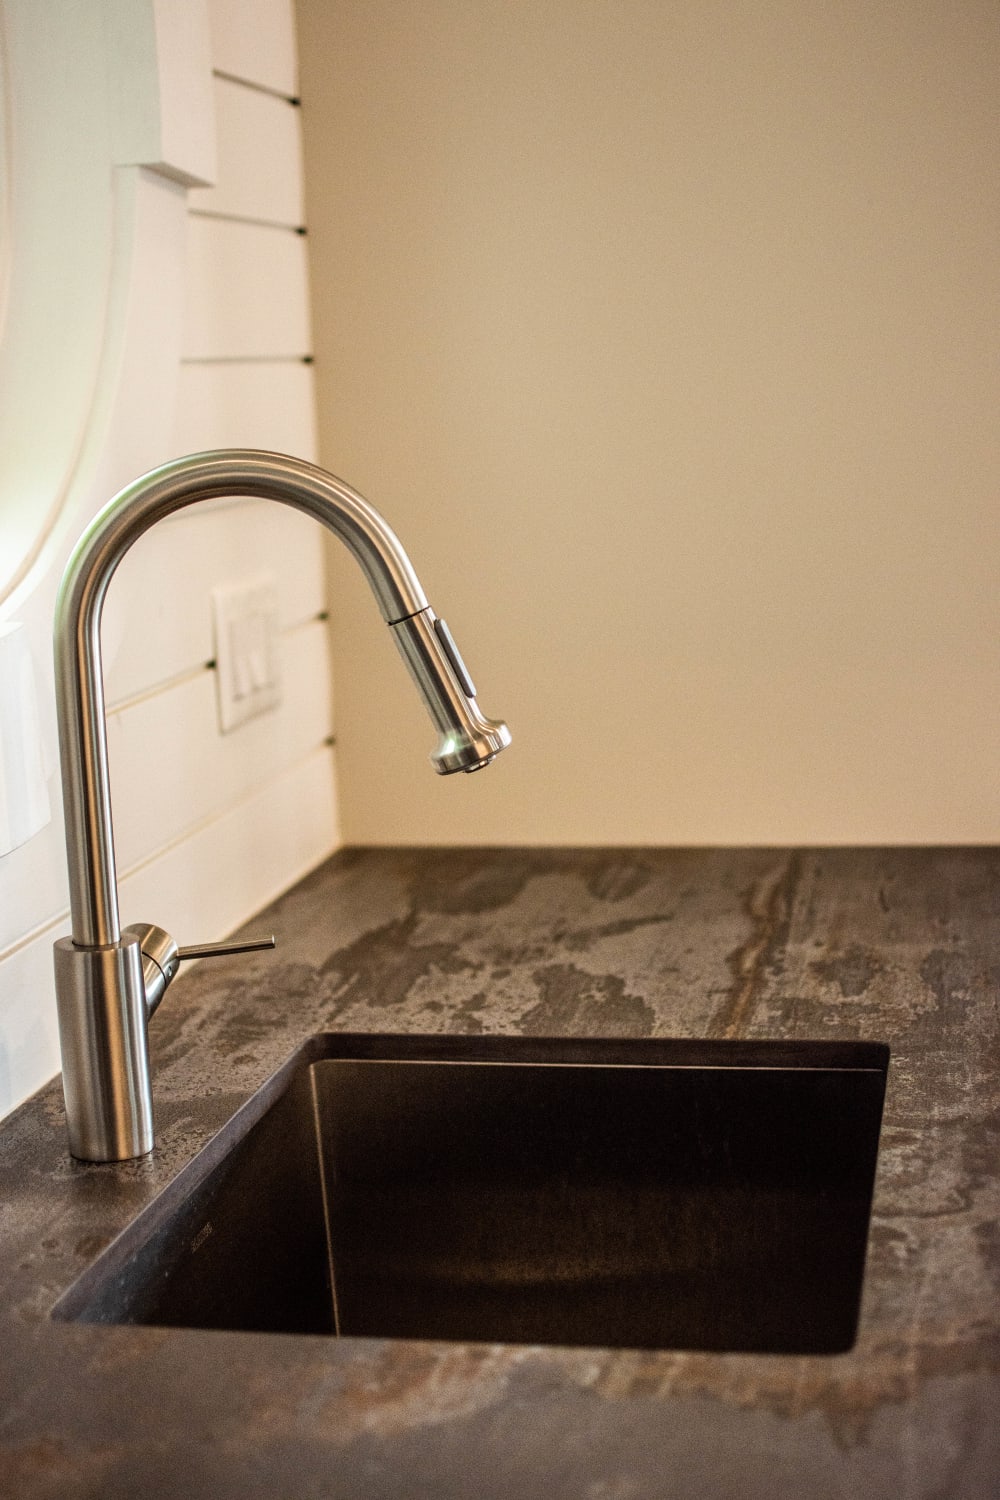 Dekton counter & stainless steel faucet